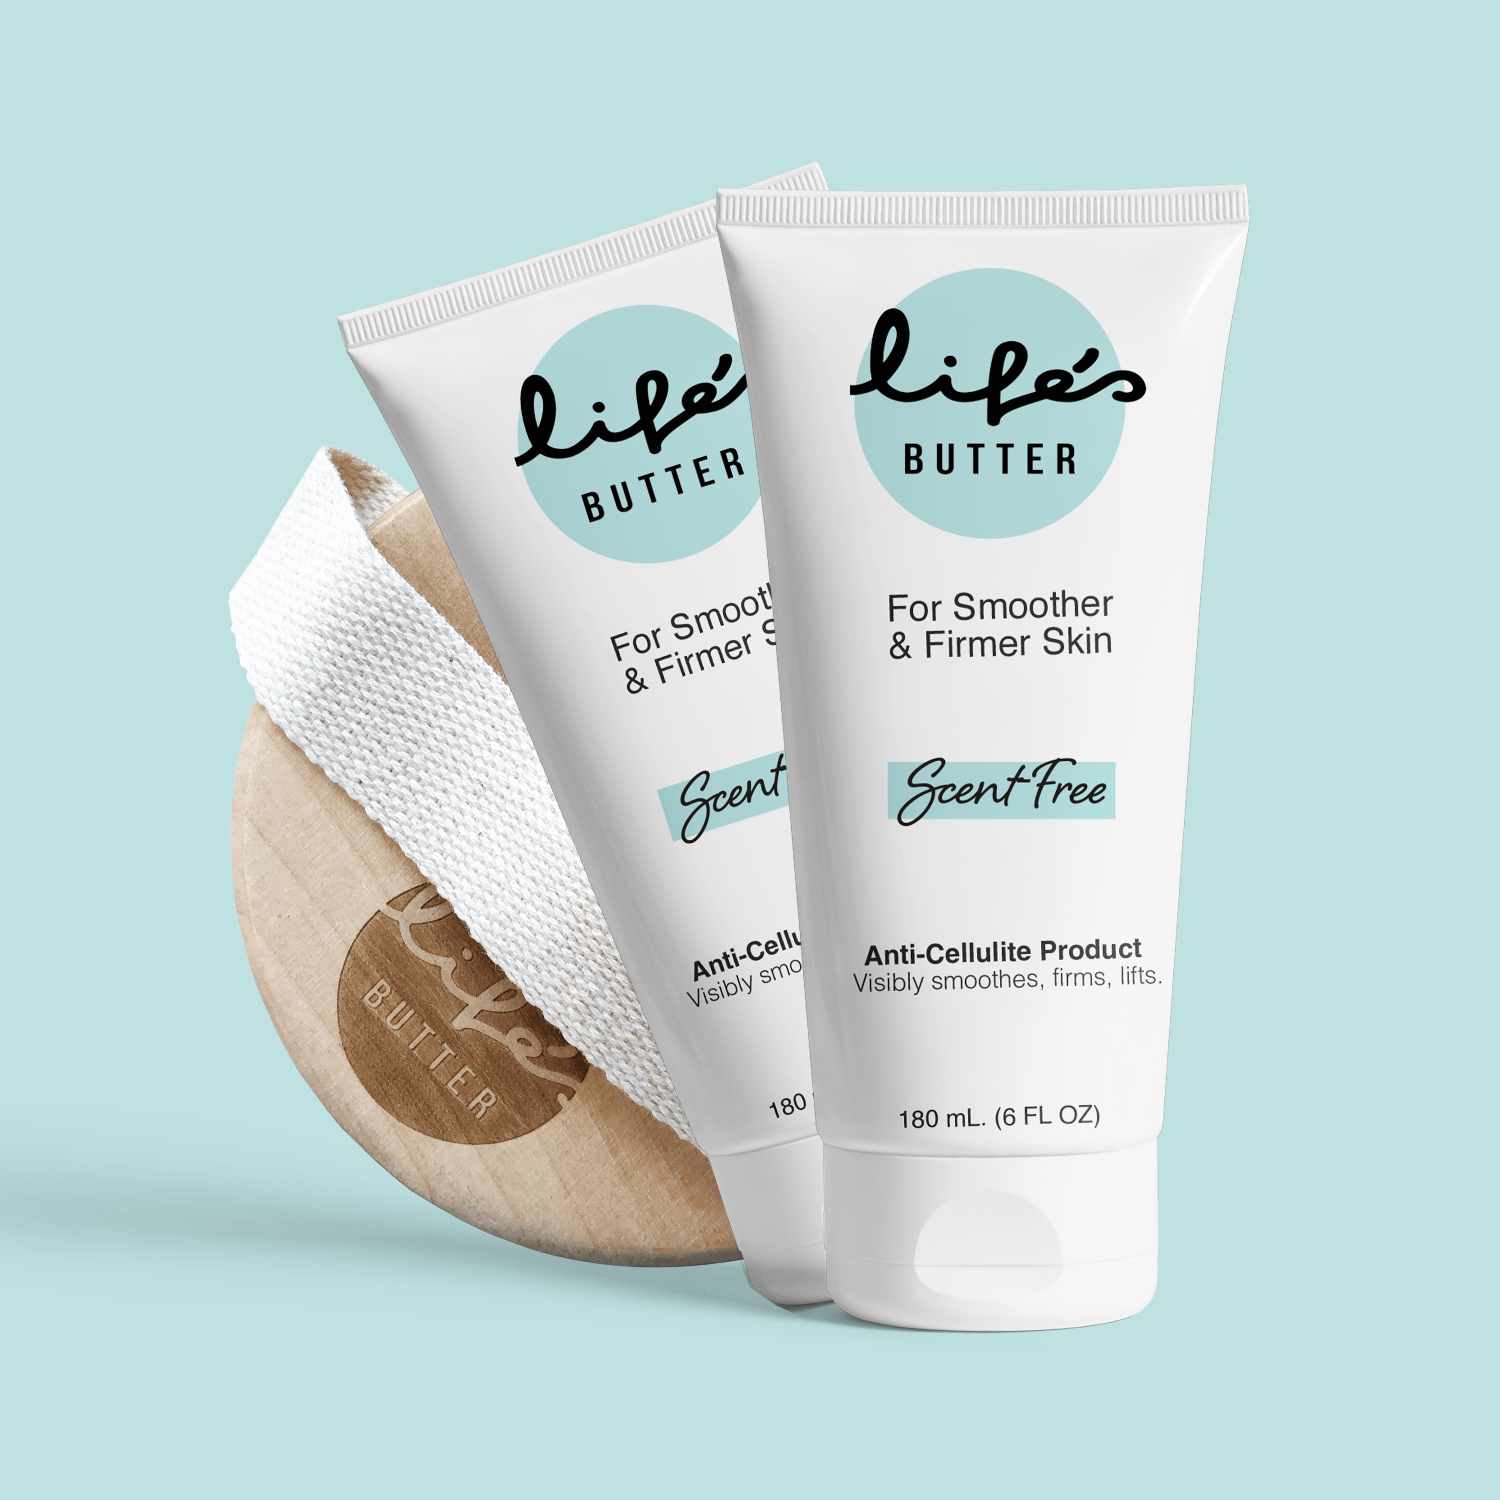 Life's butter anti-cellulite bundle with dry brush for cellulite removal - scent-free